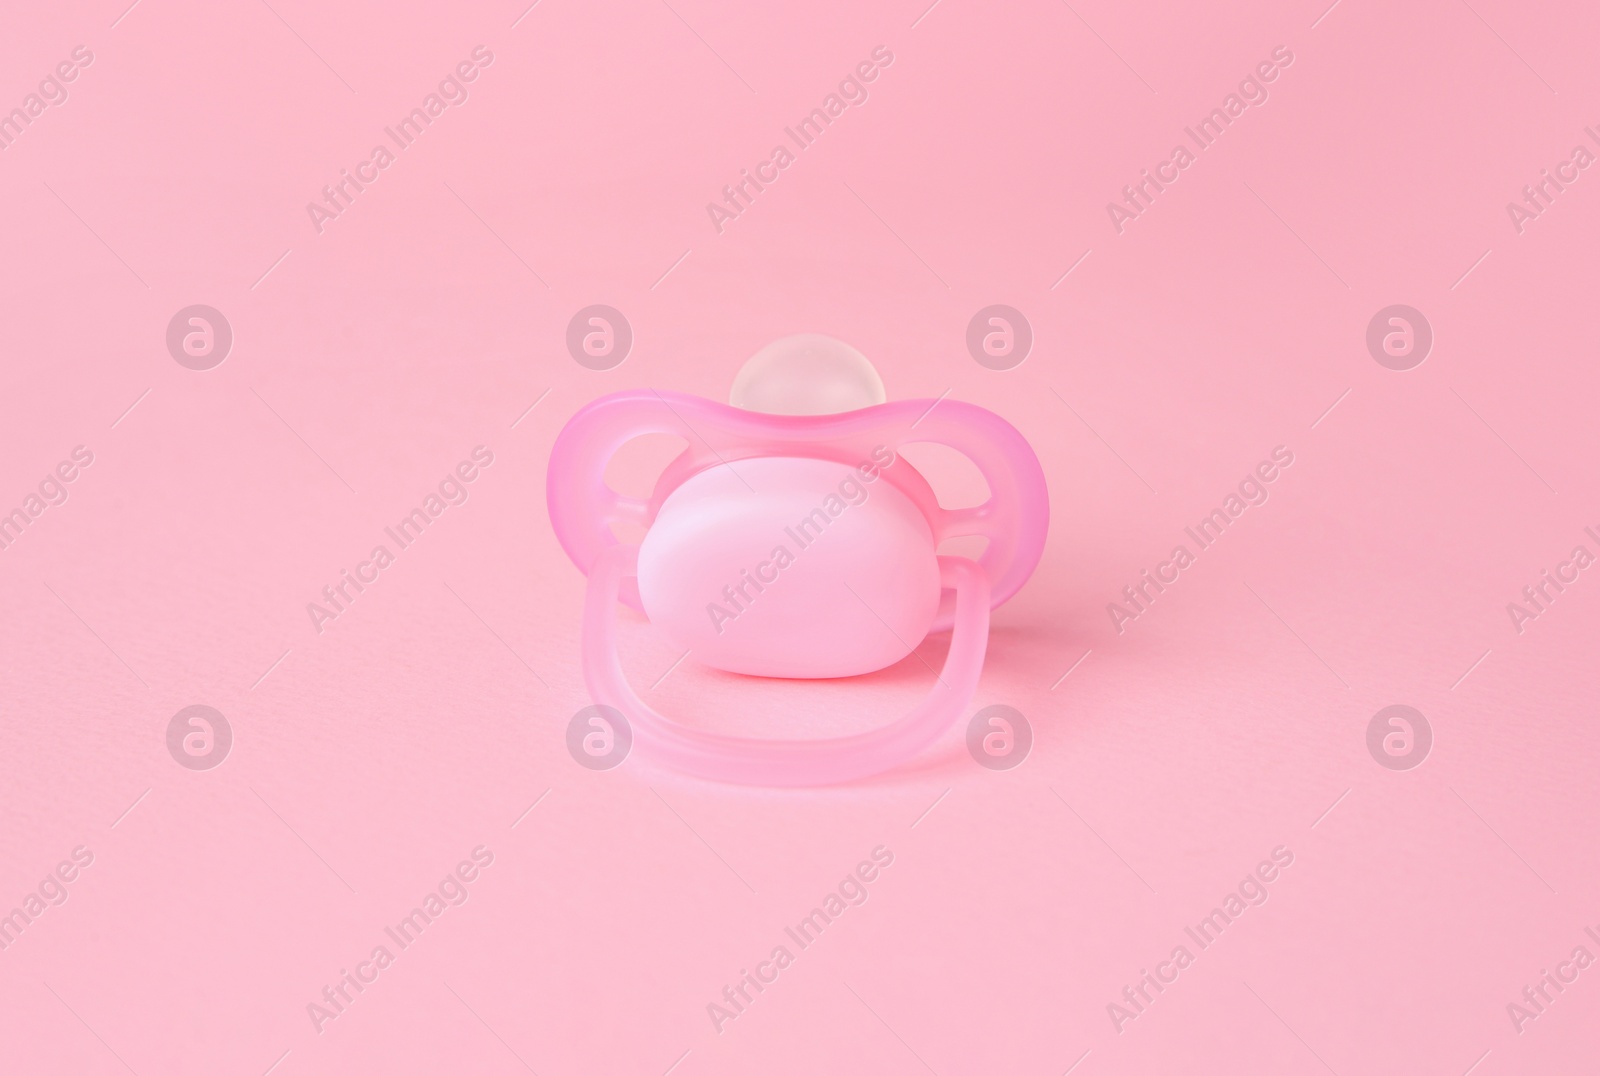 Photo of One new baby pacifier on pink background